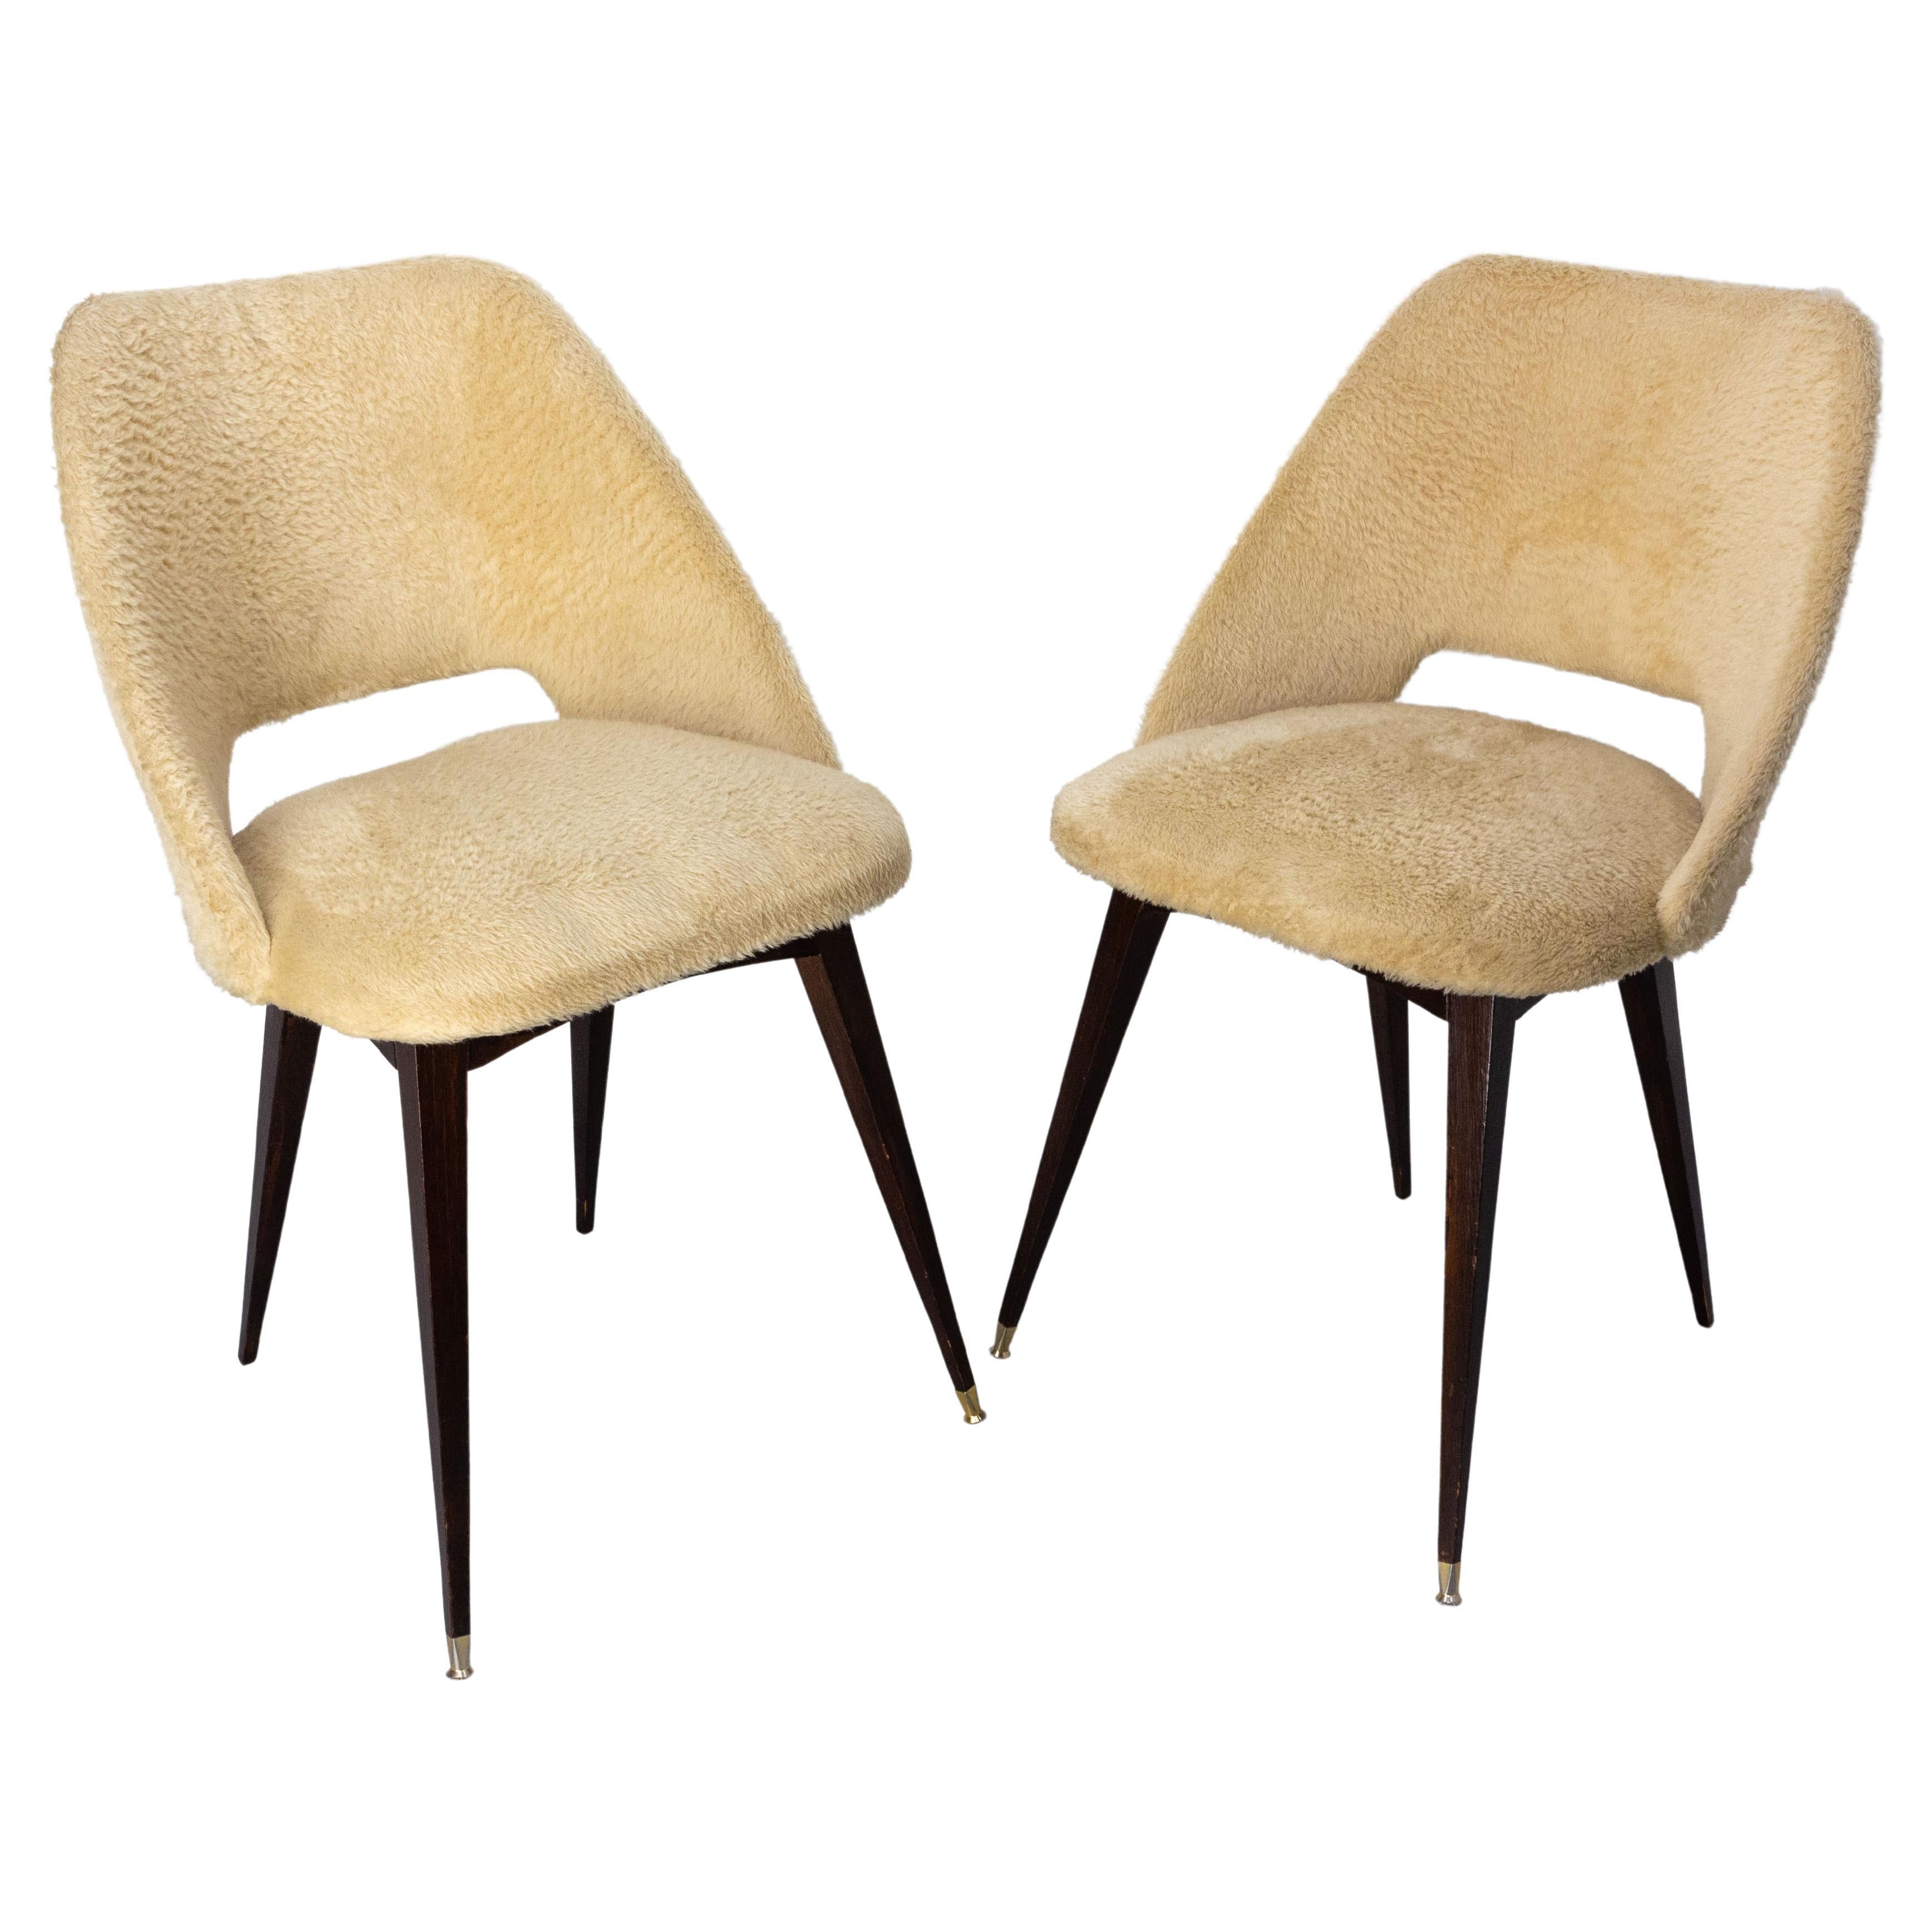 Two Midcentury French Chairs Wood and Fabric, Typical of Seventies circa 1970 For Sale